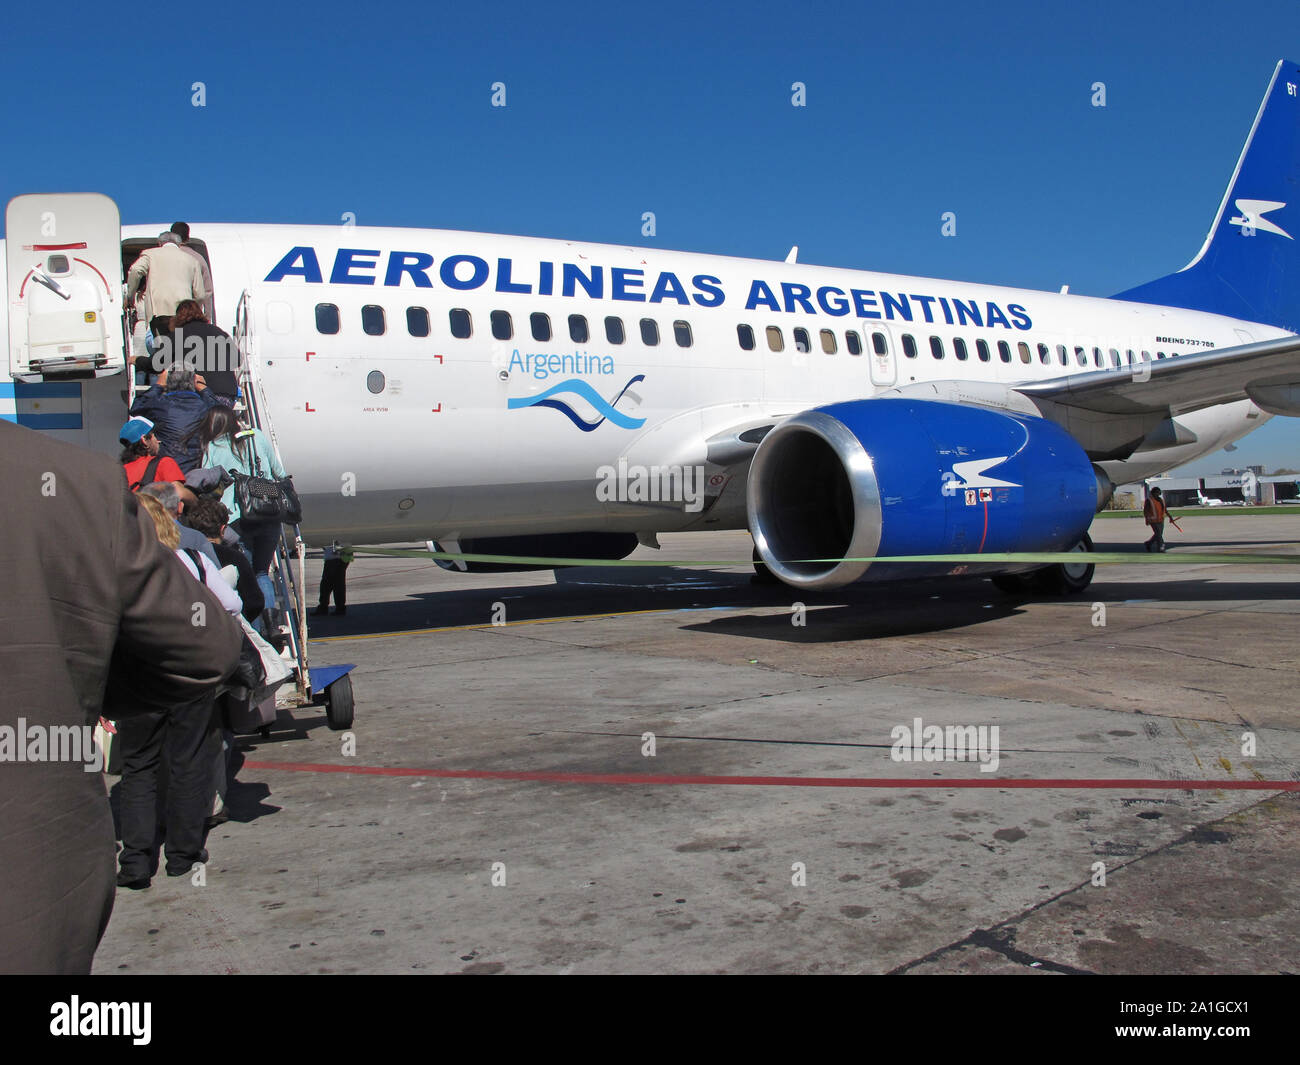 BUENOS AIRES - SEP 14: A Aerolineas Argentinas aircraft at Ezeiza International Airport September 14, 2012 in Buenos Aires, Argentina. It is the only Stock Photo